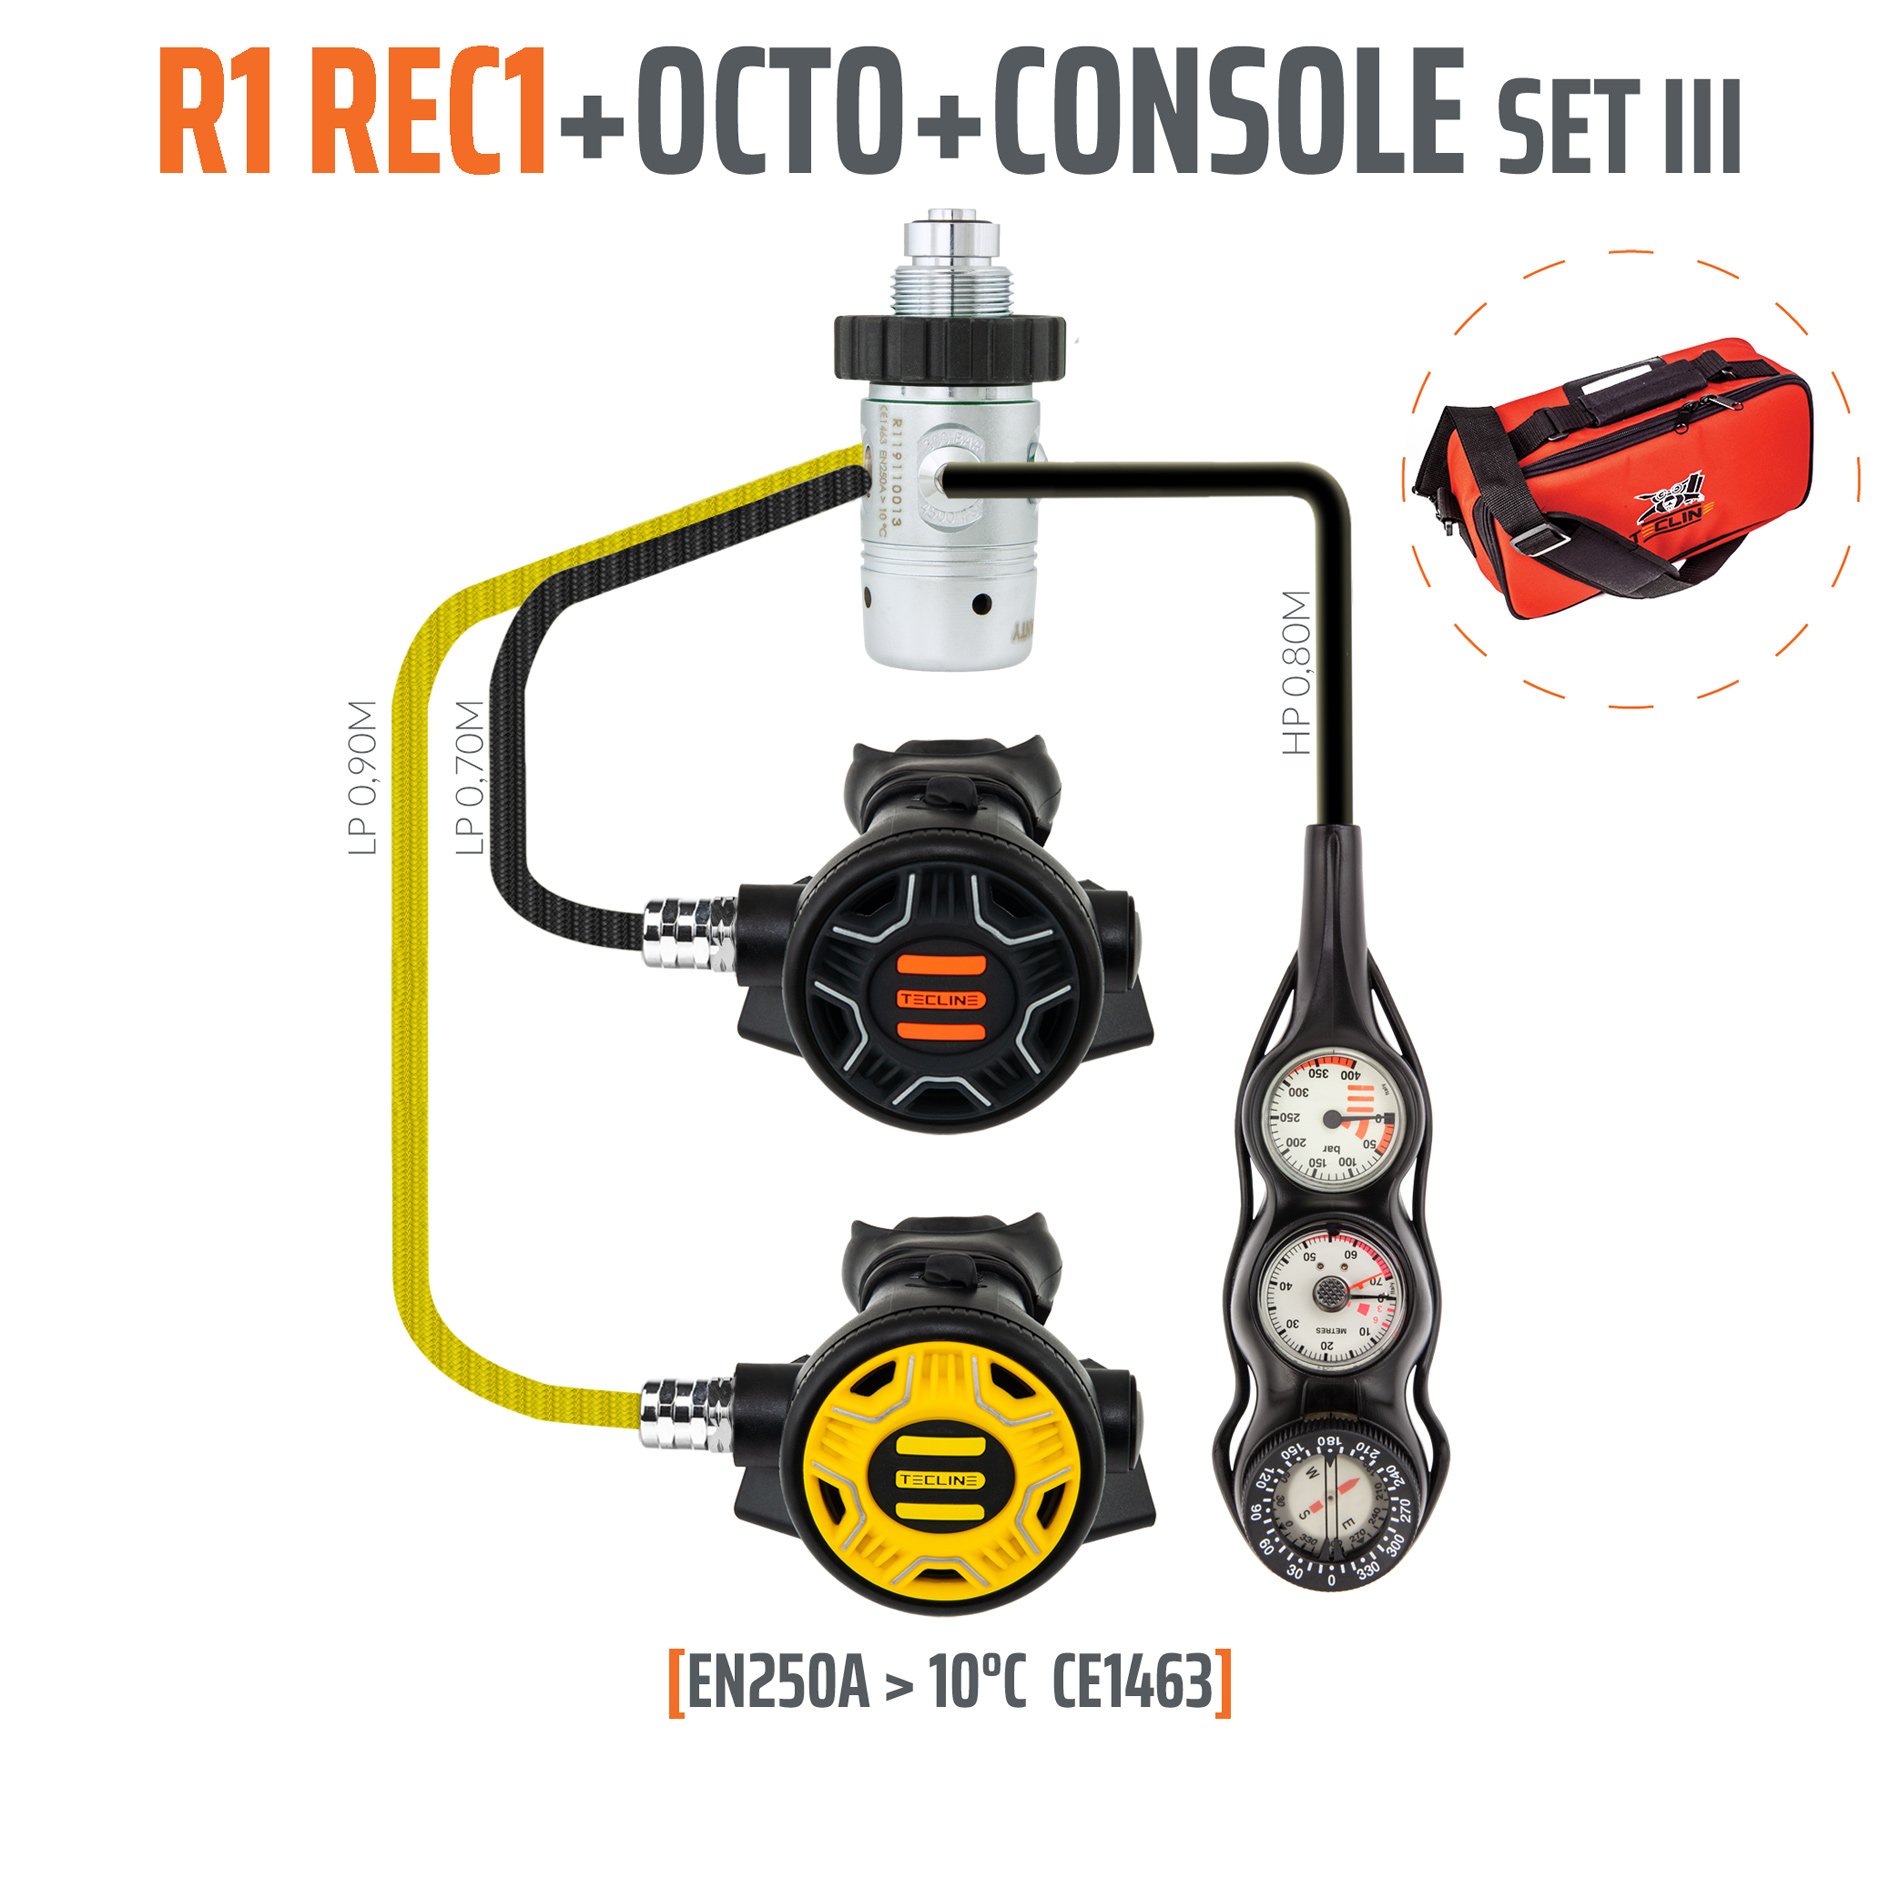 Tecline Regulator R1 REC1 set III with octo and 3 elements console – EN250A > 10°C